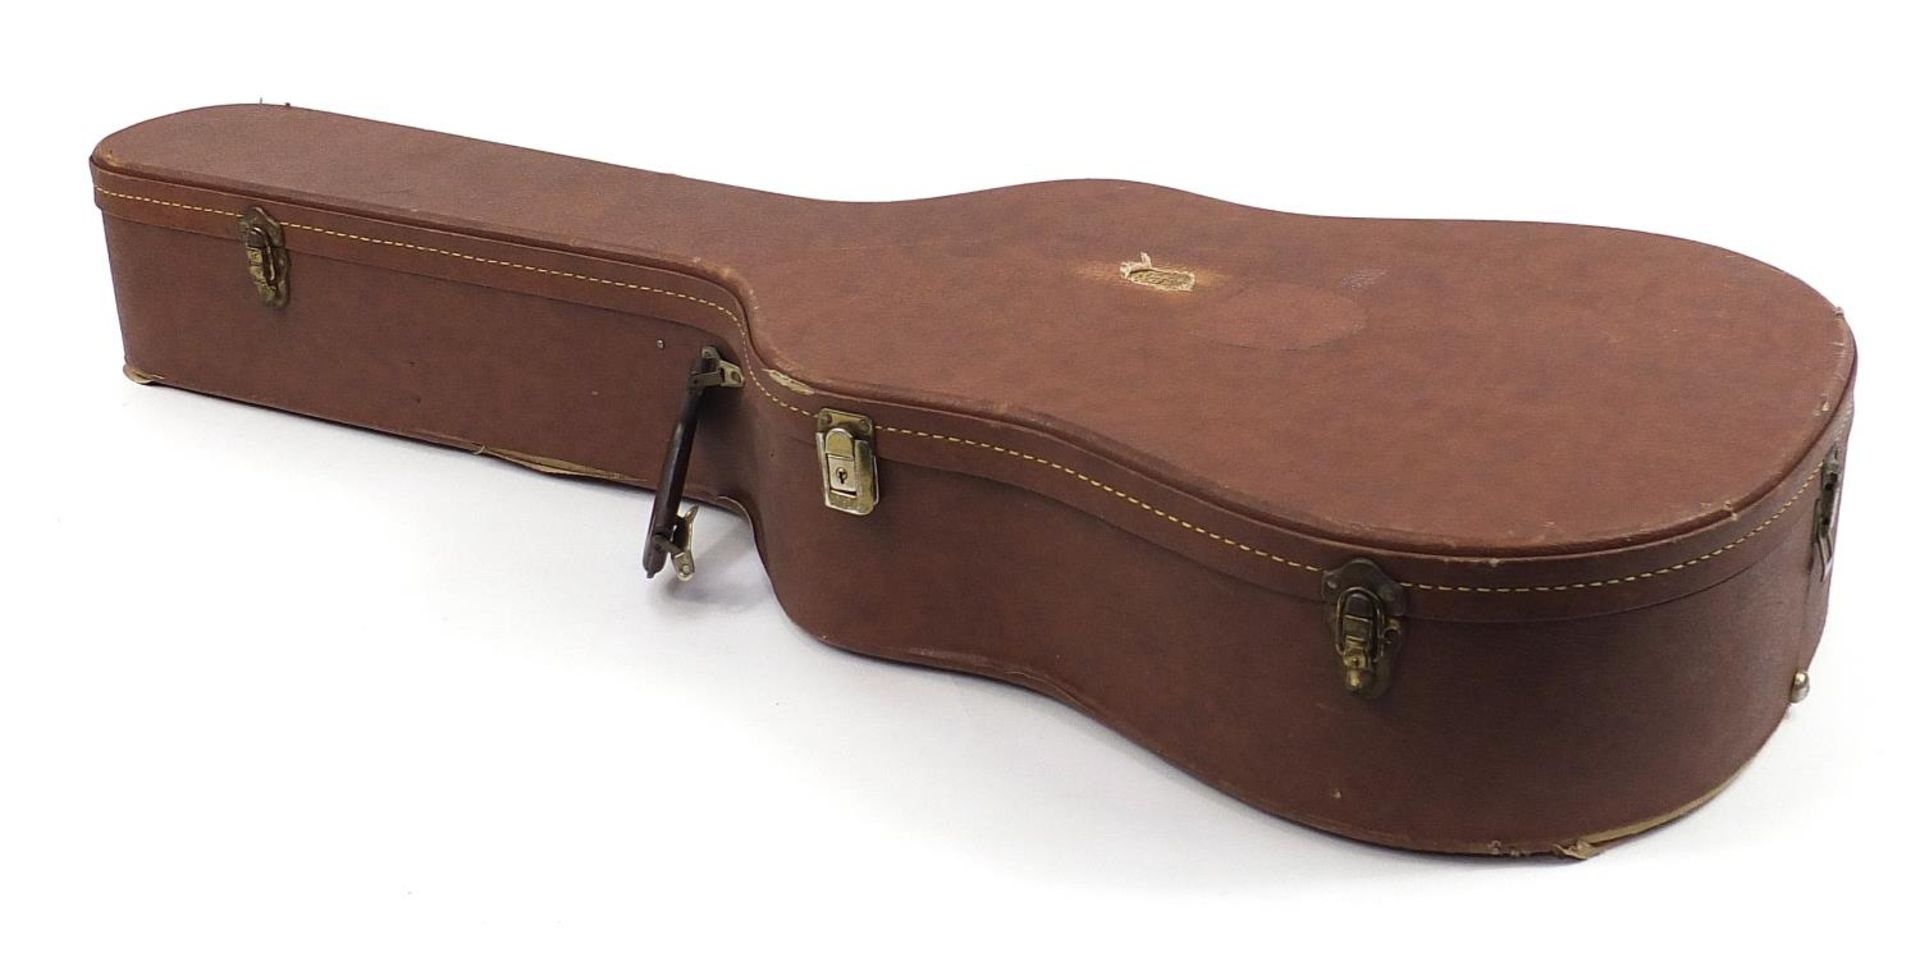 Hoyer, German wooden twelve string acoustic guitar with protective carry case - Image 6 of 6